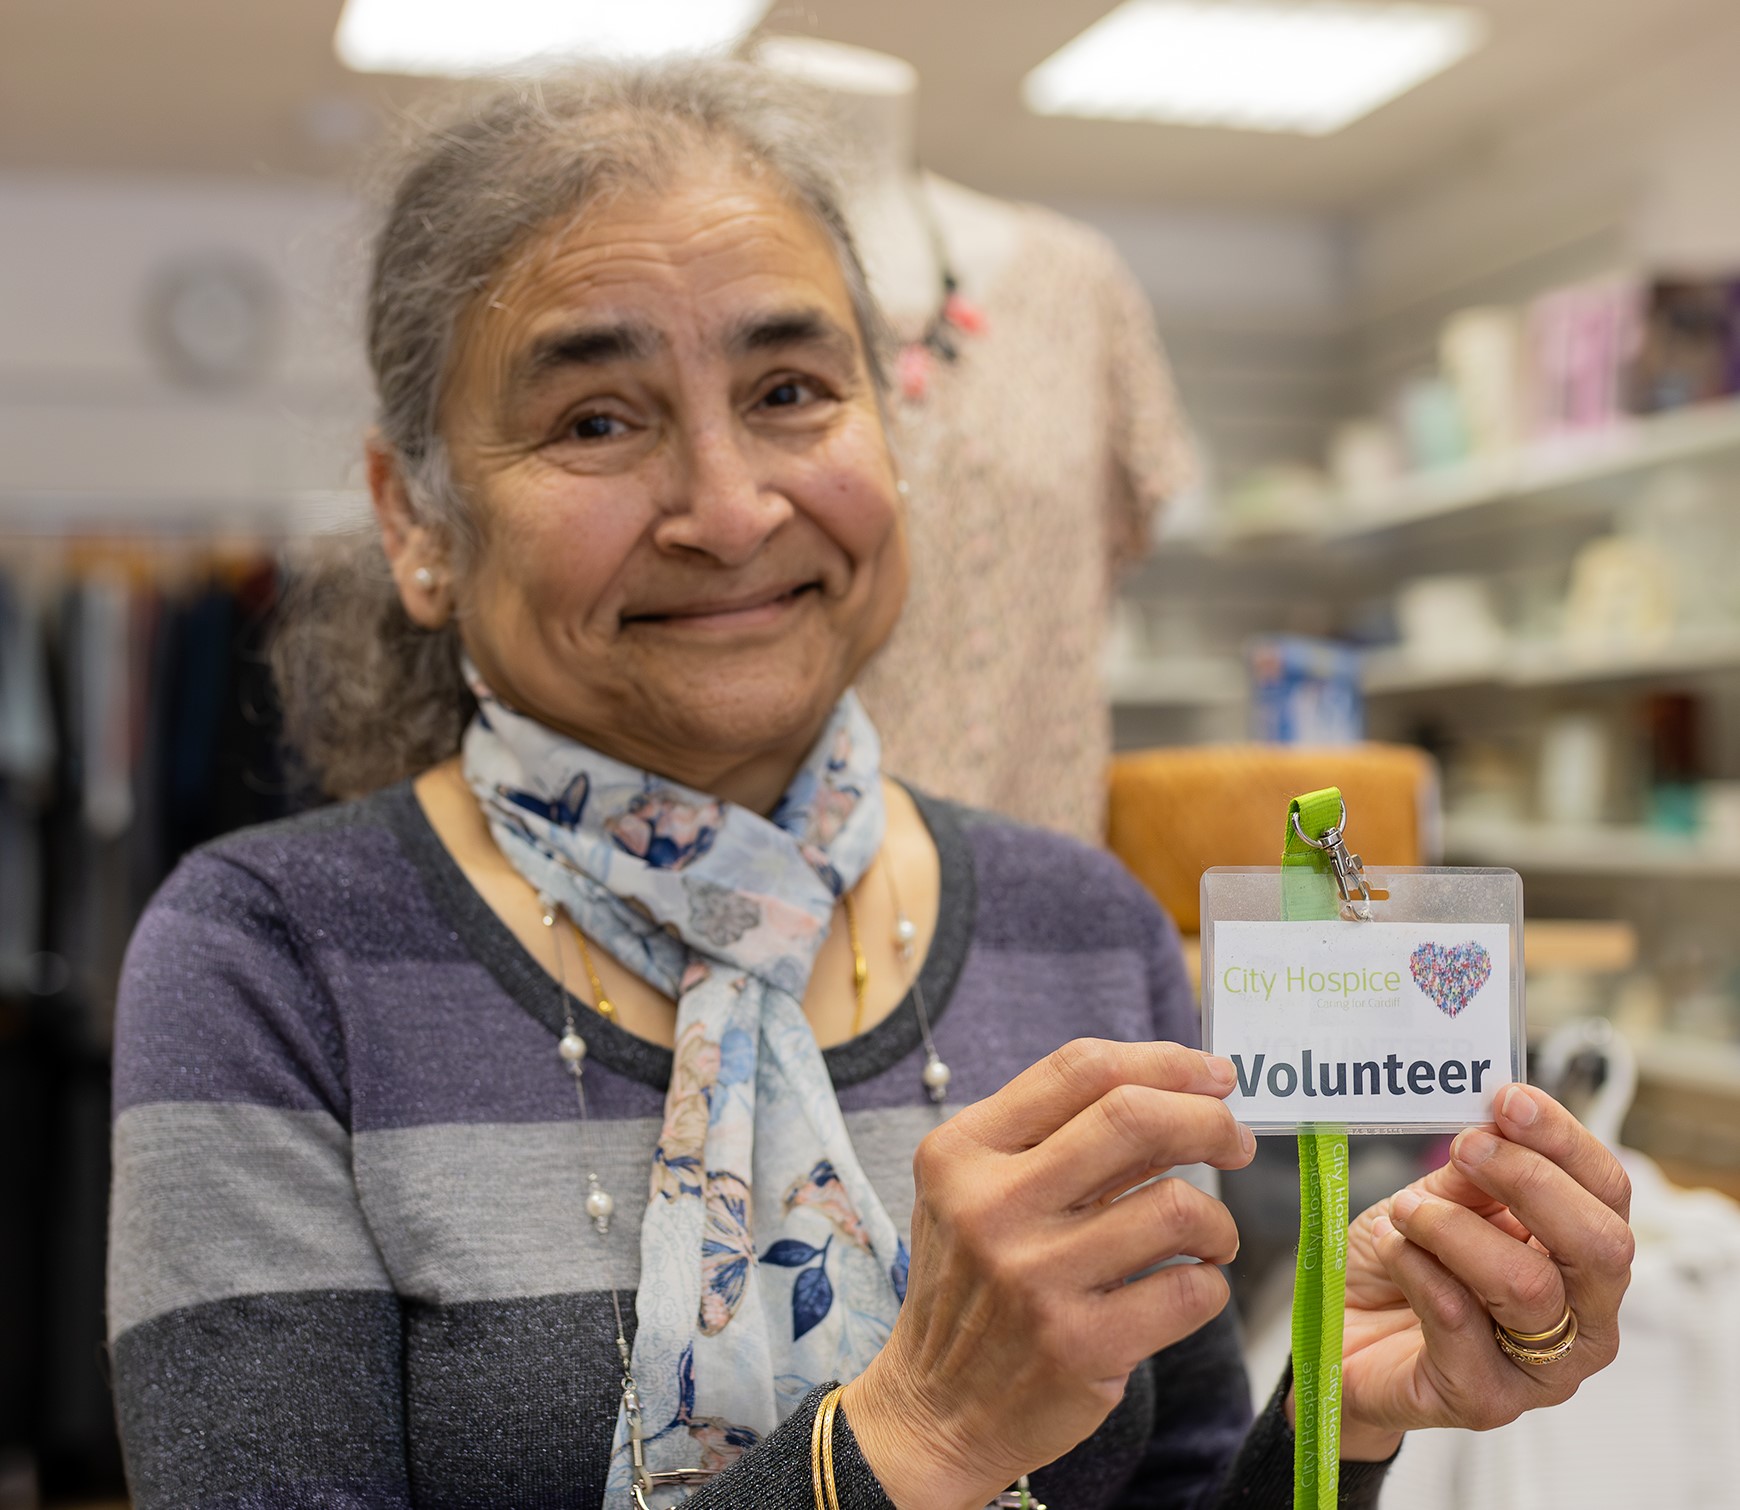 A City Hospice charity shop volunteer proudly holds her volunteer lanyard